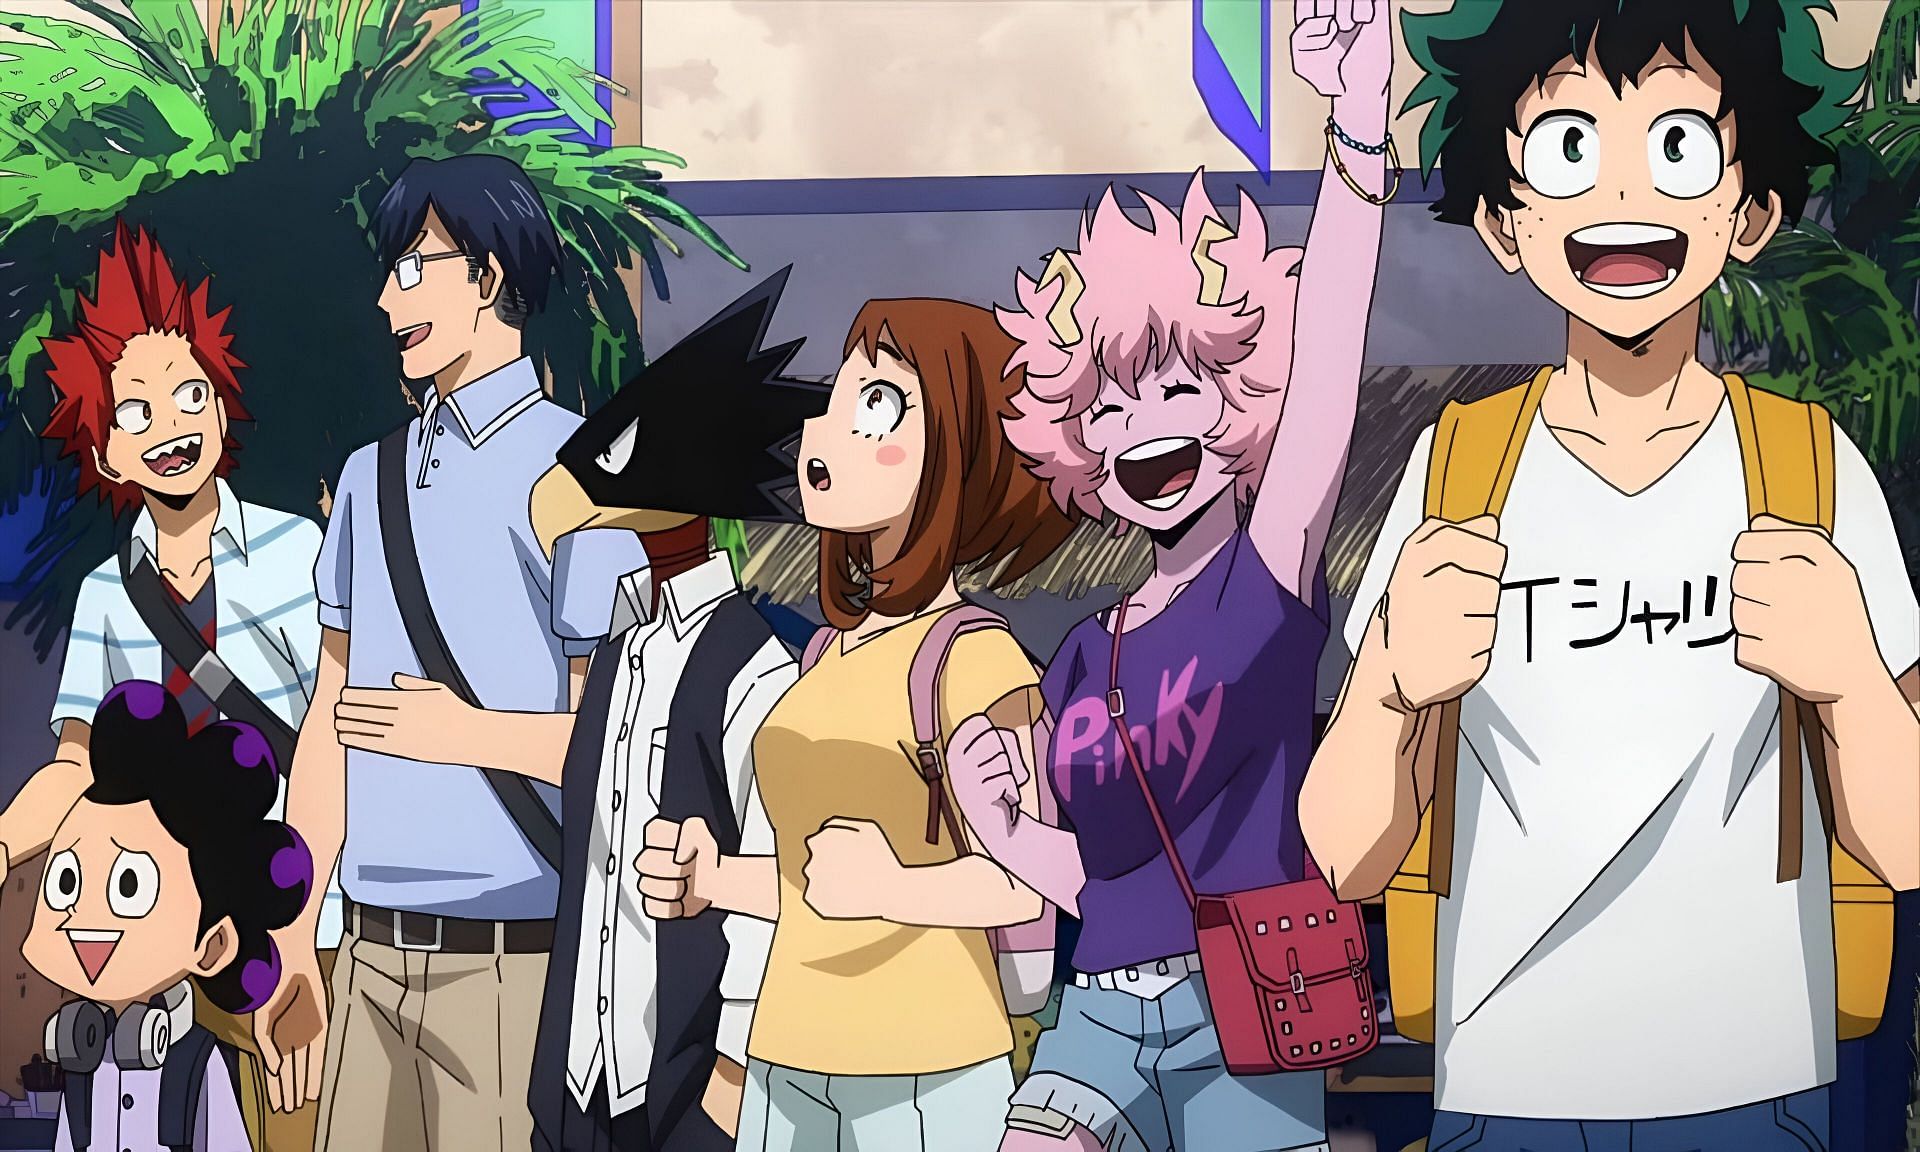 Class 1-A students as seen in the anime (Image via Bones)